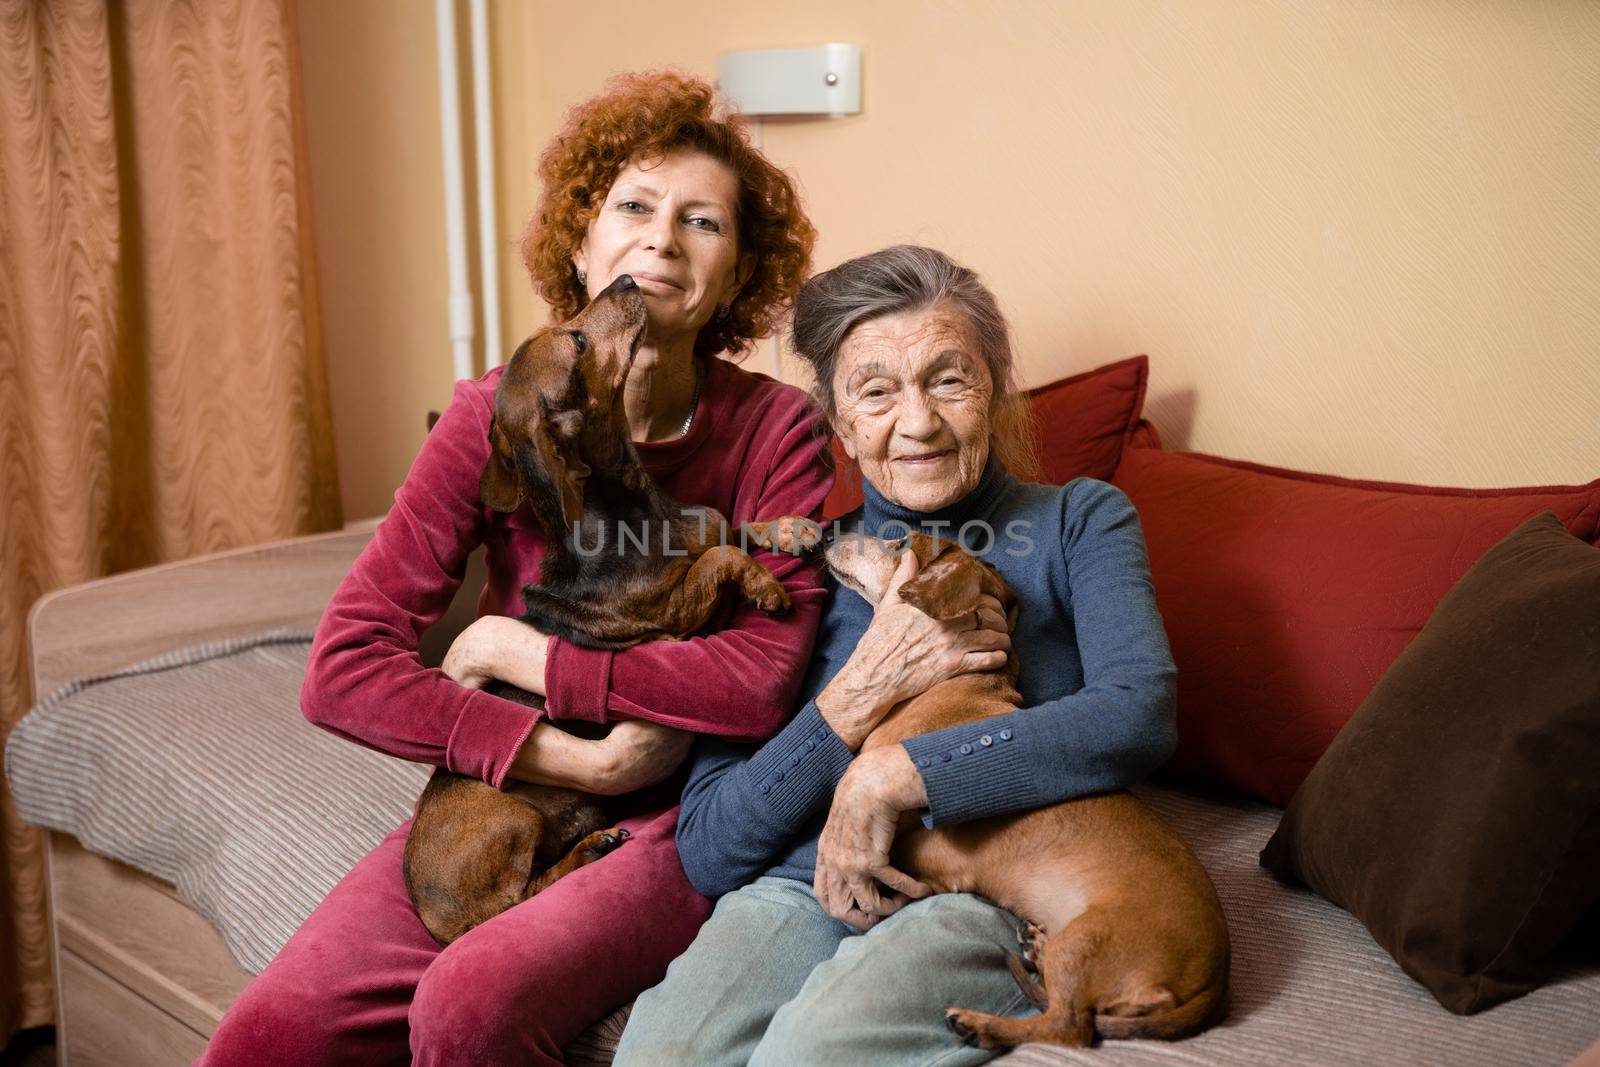 Elder woman and her adult daughter together with two dachshund dogs on sofa indoors spend time happily, portrait. Theme of mother and daughter relationship, taking care of parents, family care by Tomashevska